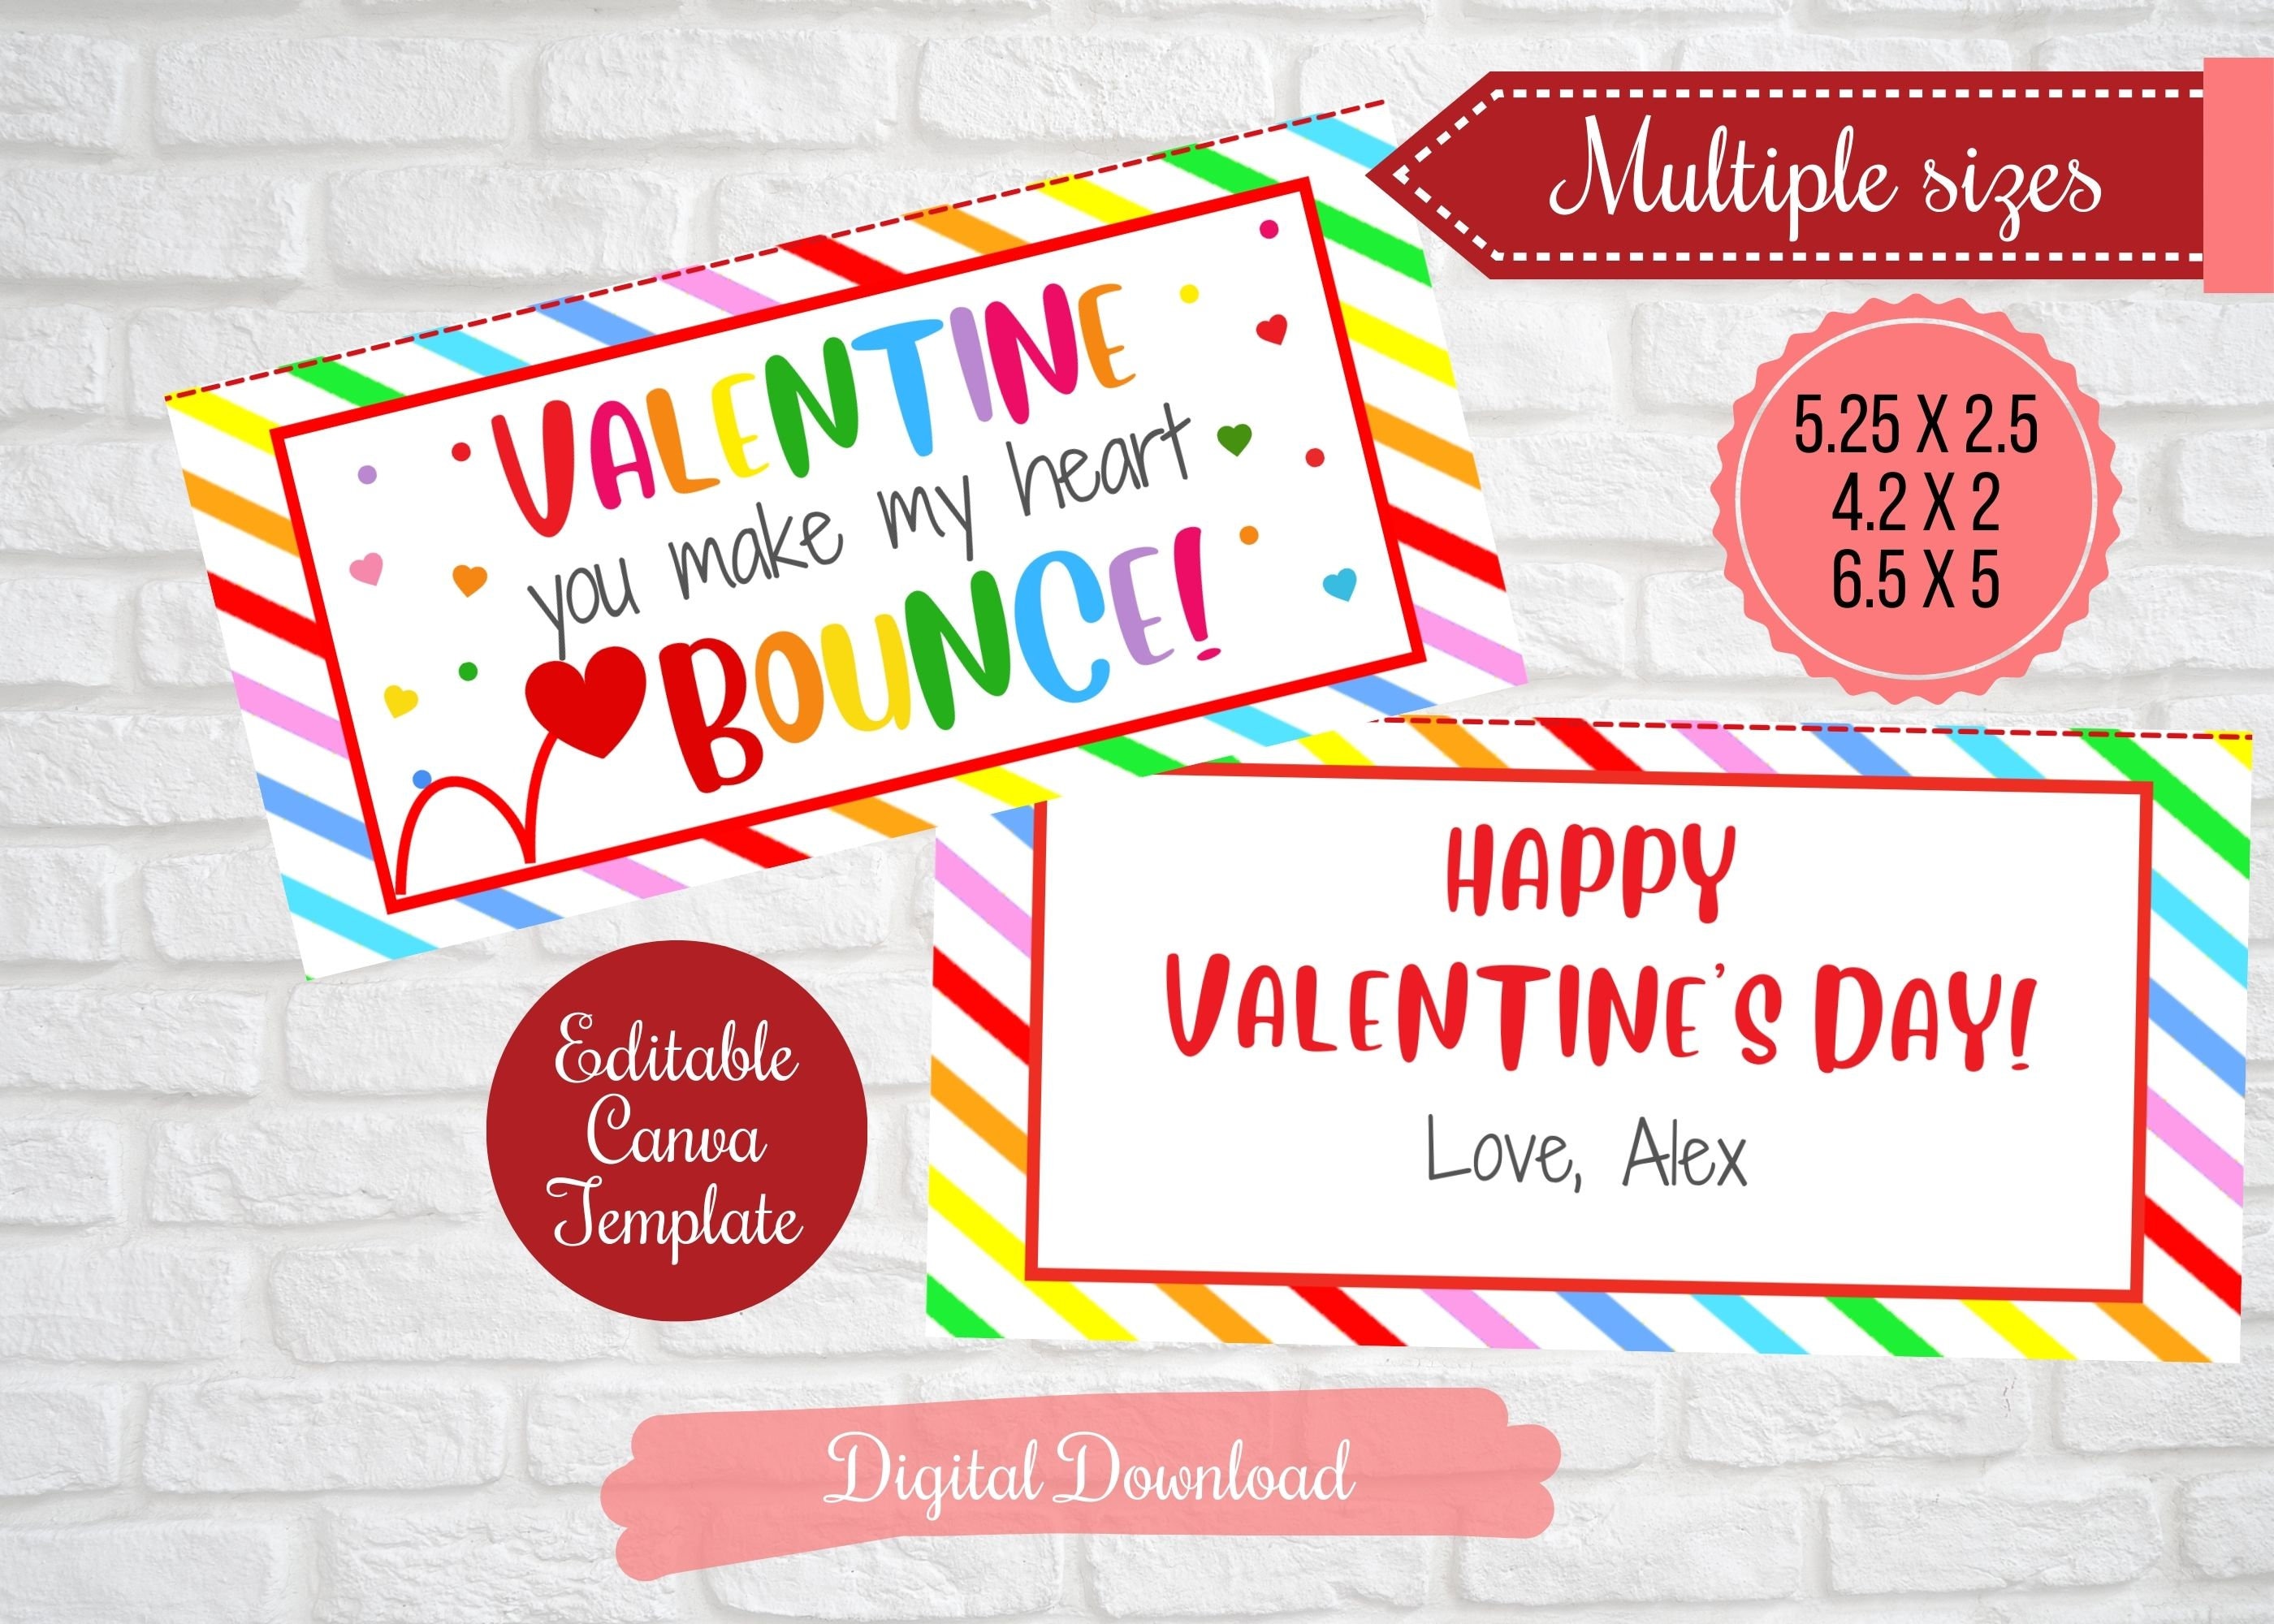 Personalized Kids Valentine Cards for School, Red Valentine's Day Cards for  Girls, Classroom Valentines, Kids Class Valentines, Red Hearts 